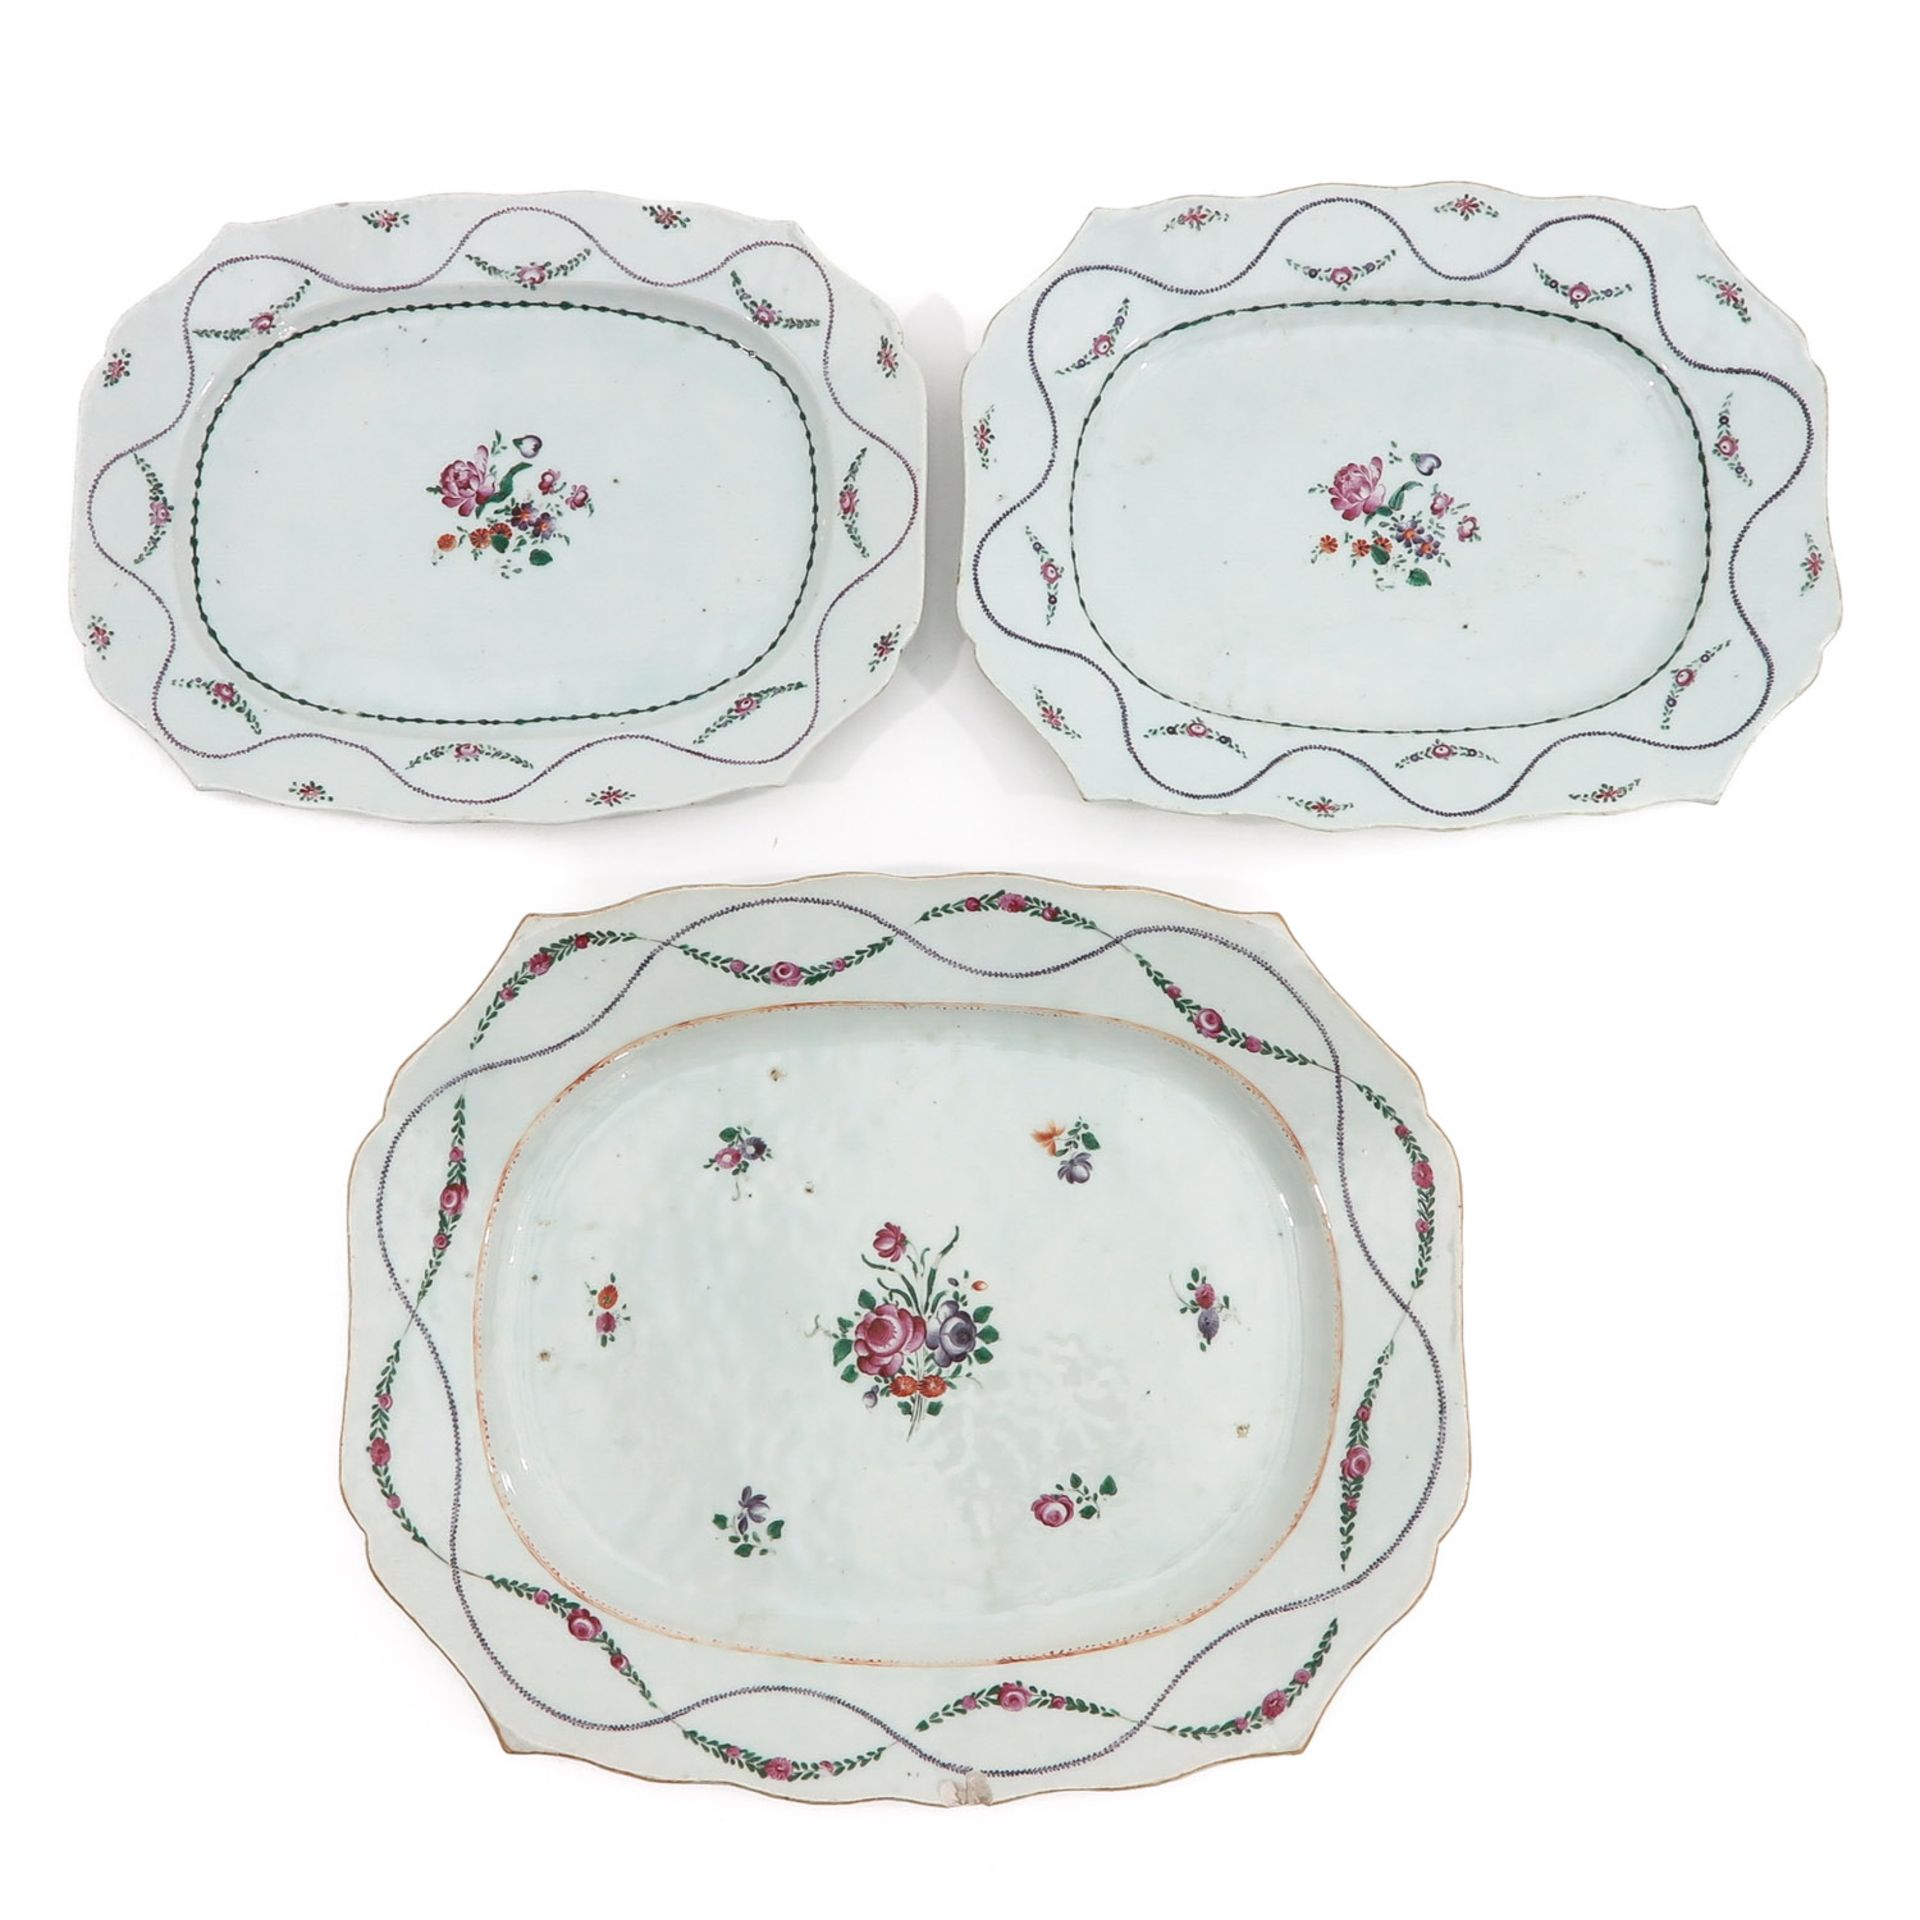 A Lot of 3 Famille Rose Serving Trays